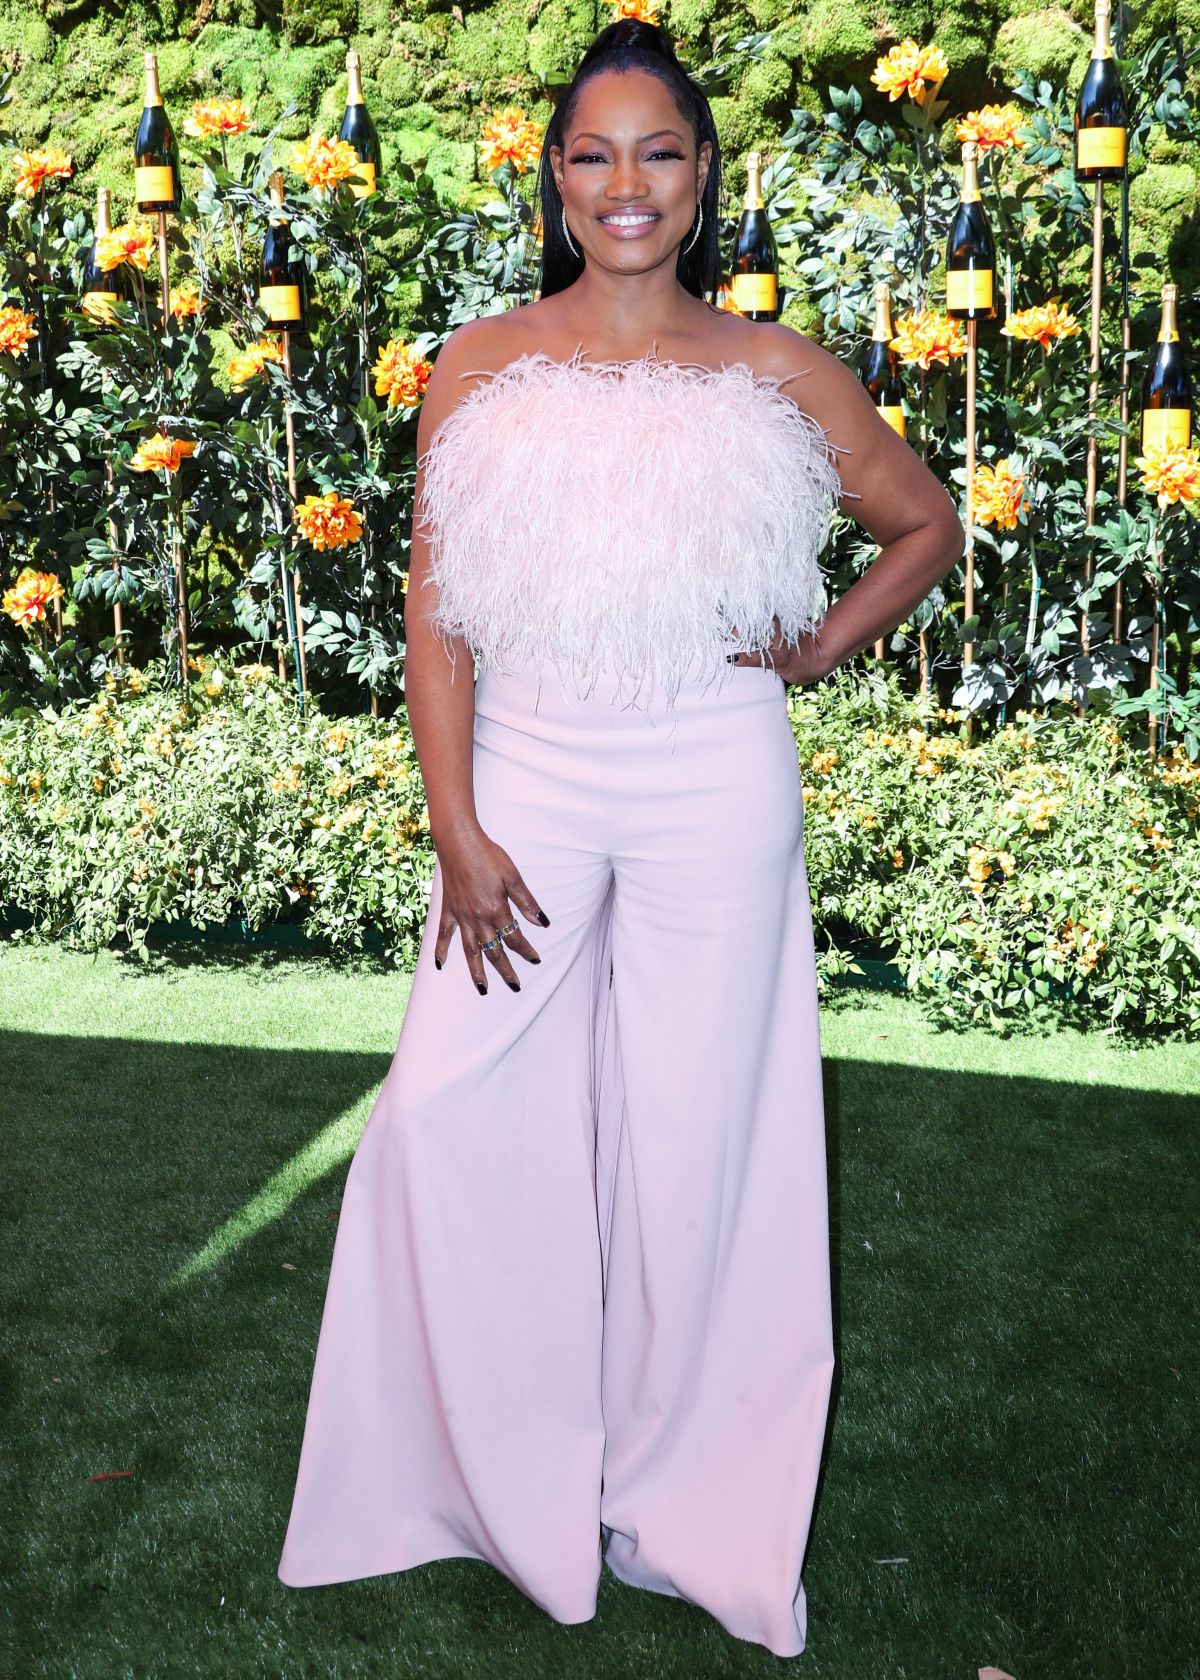 garcelle-beauvais-at-veuve-clicquot-polo-classic-at-will-rogers-state-park-in-los-angeles-10-05-2019-7.jpg